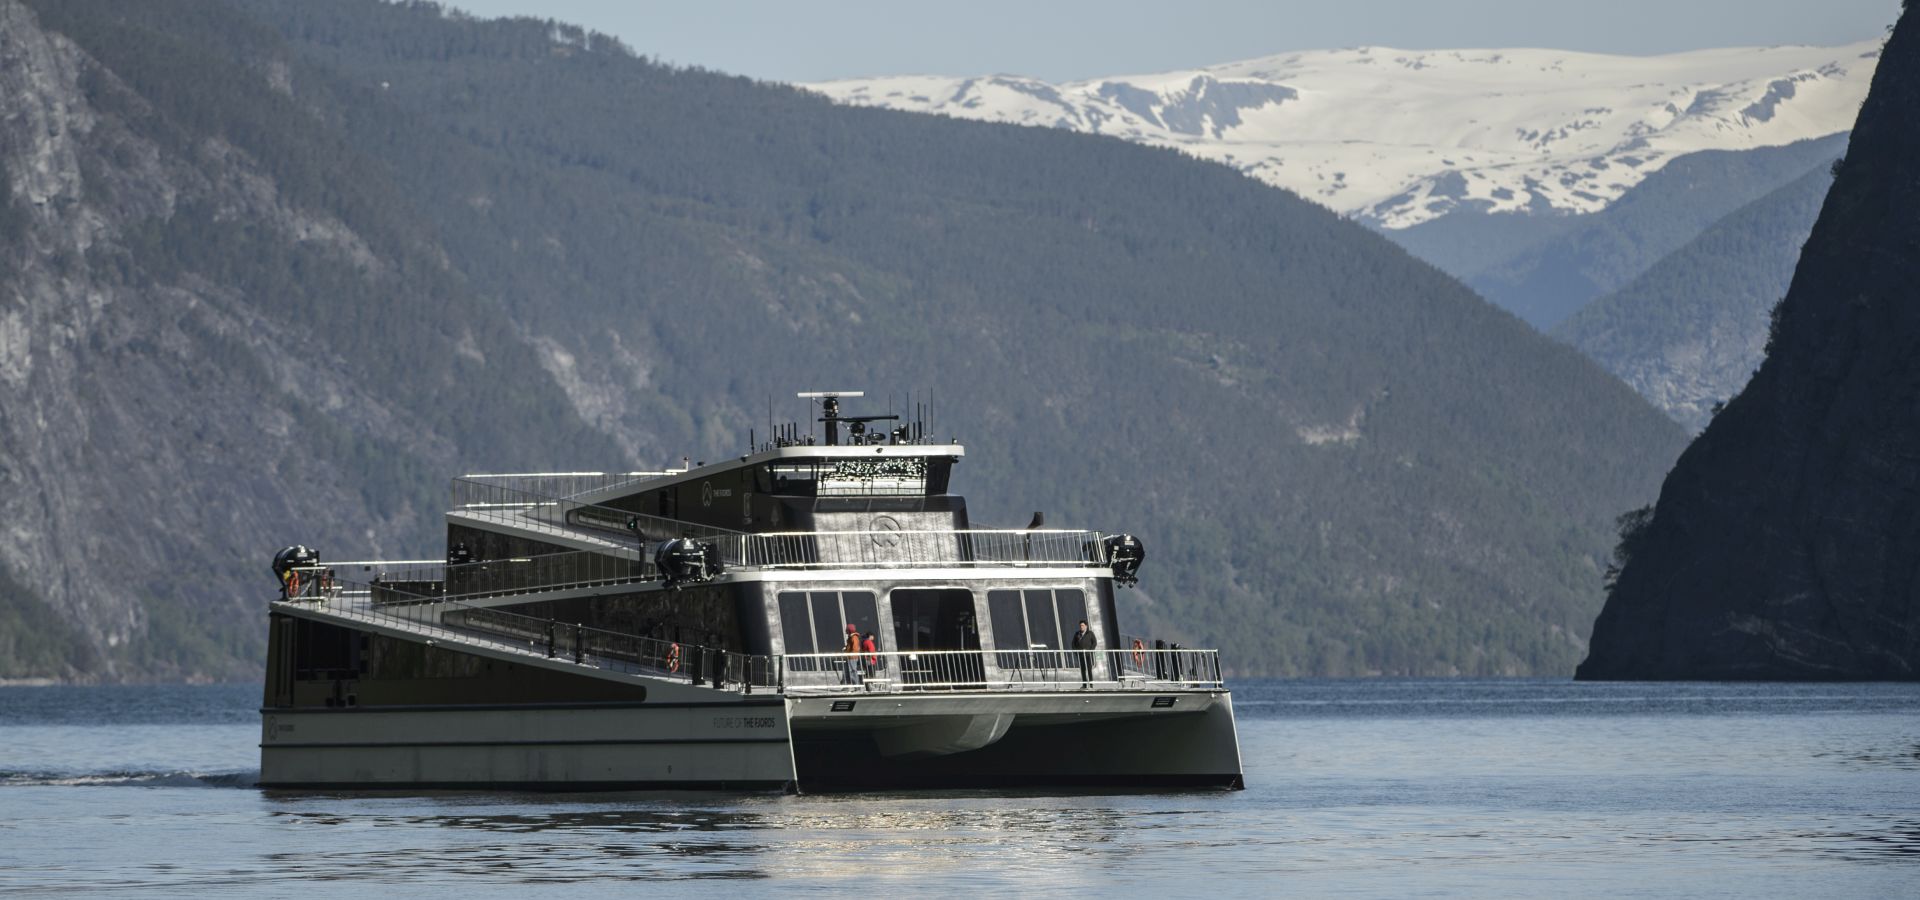 Norway is transforming the world of shipping with the battery-powered passenger ship called Future of the Fjords.